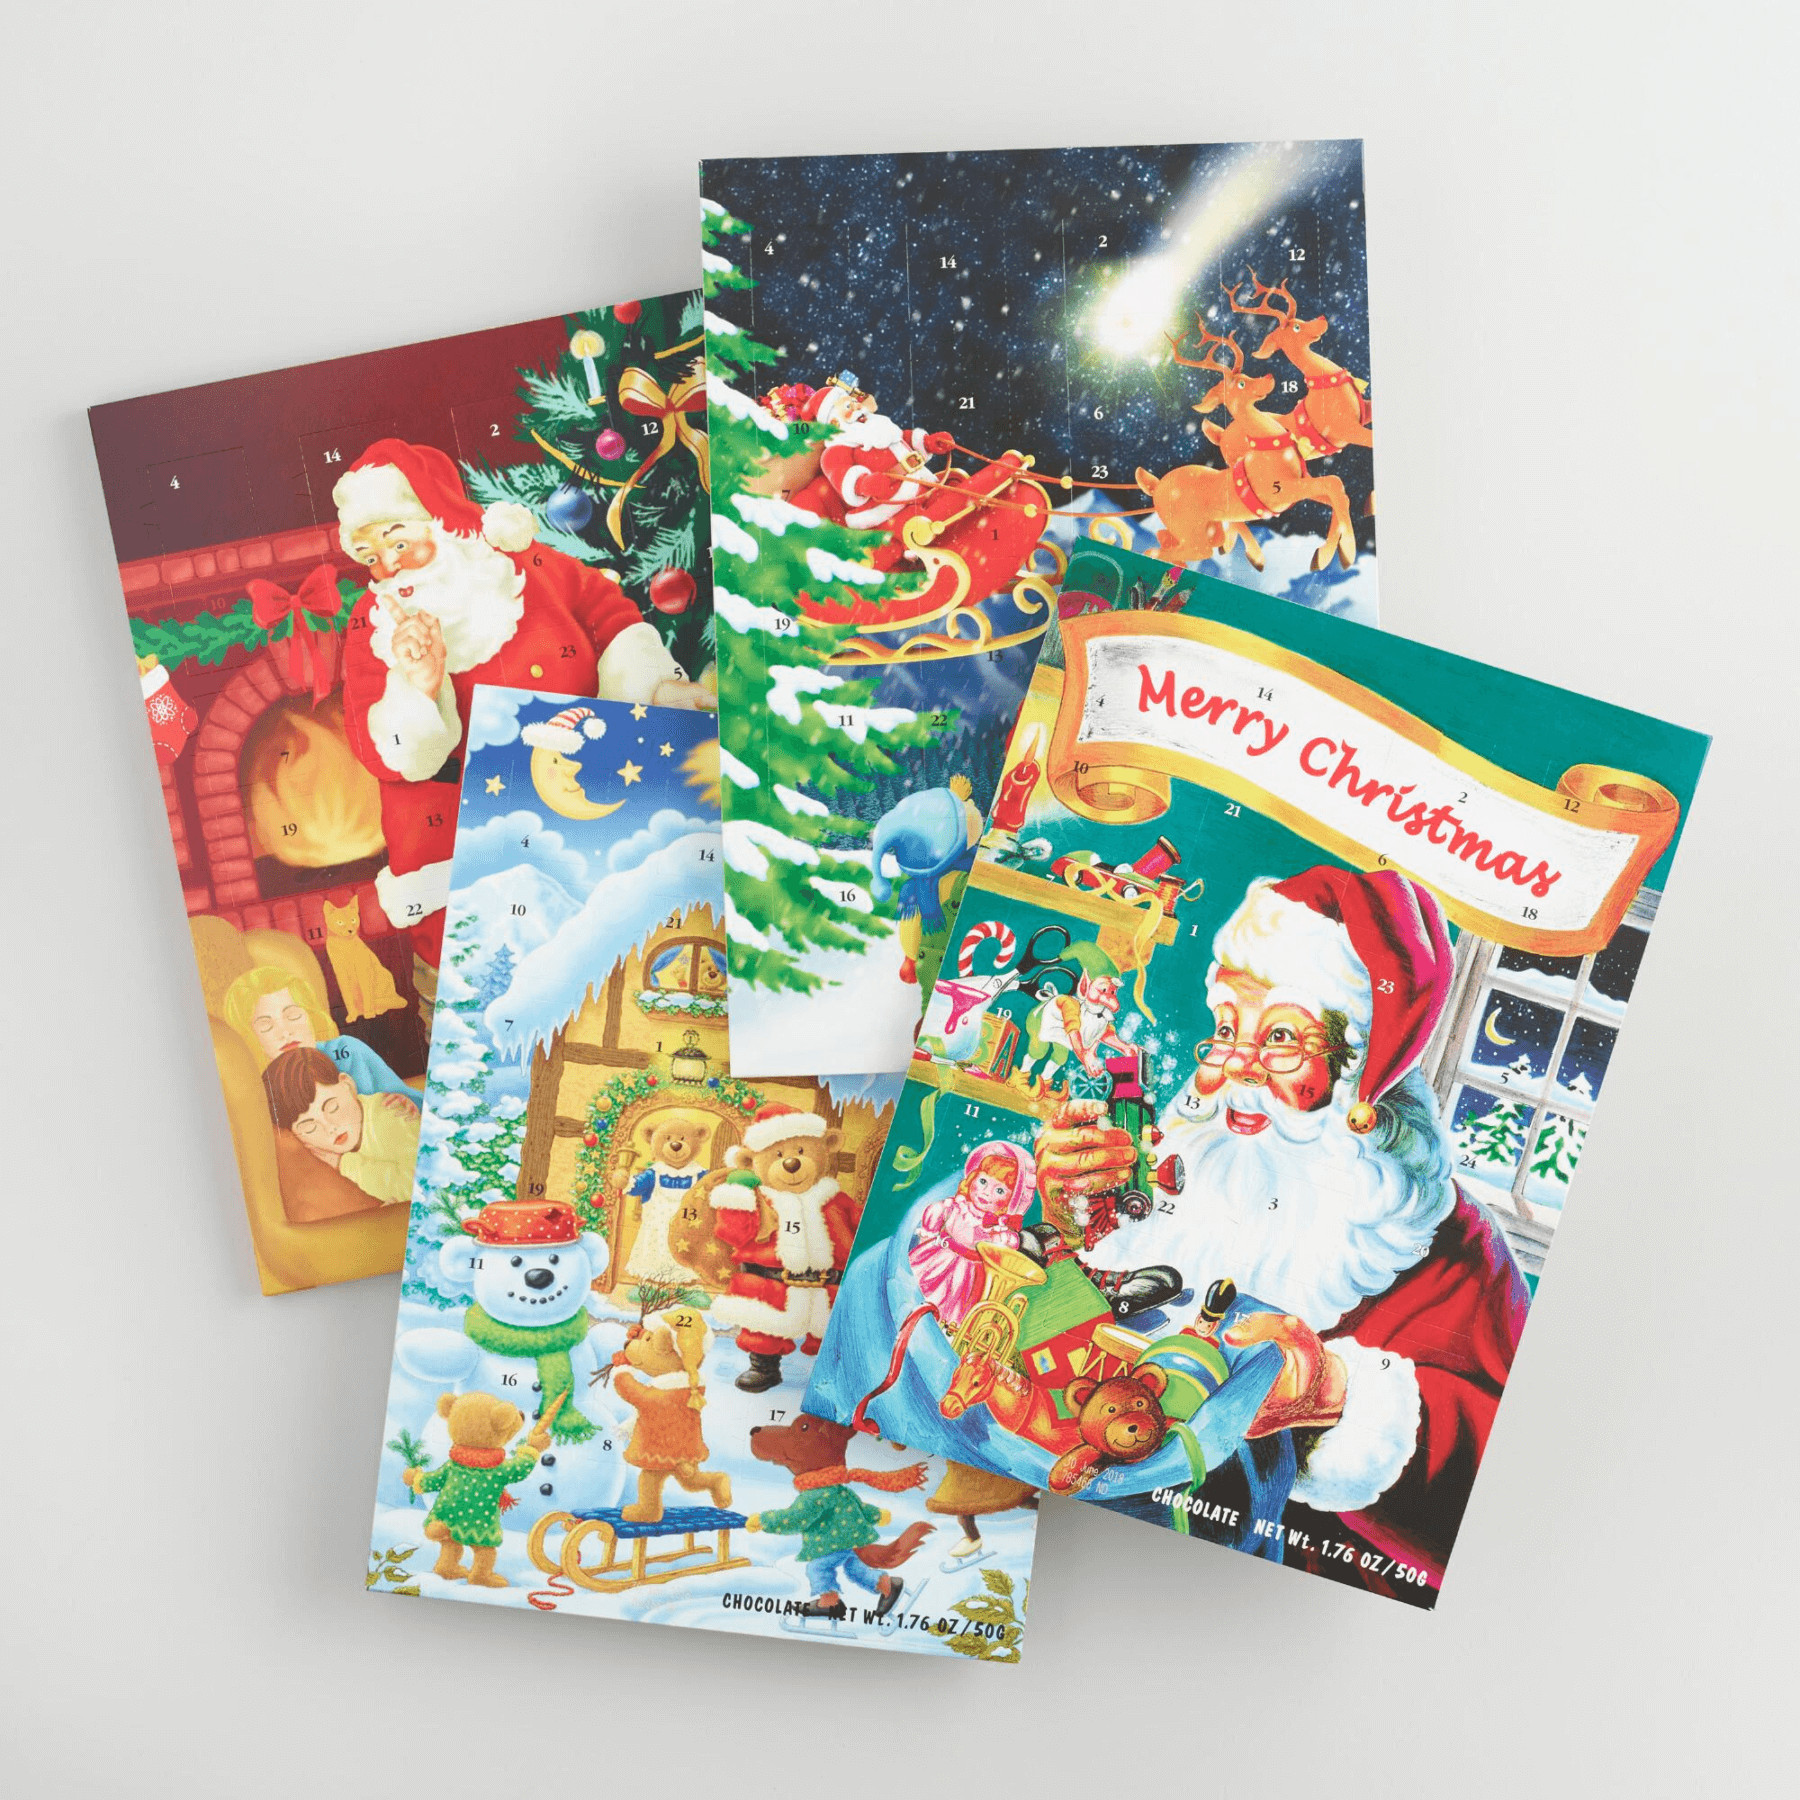 Christmas Candy Calendars
 Chocolate & Candy Advent Calendars For a Sweet Christmas